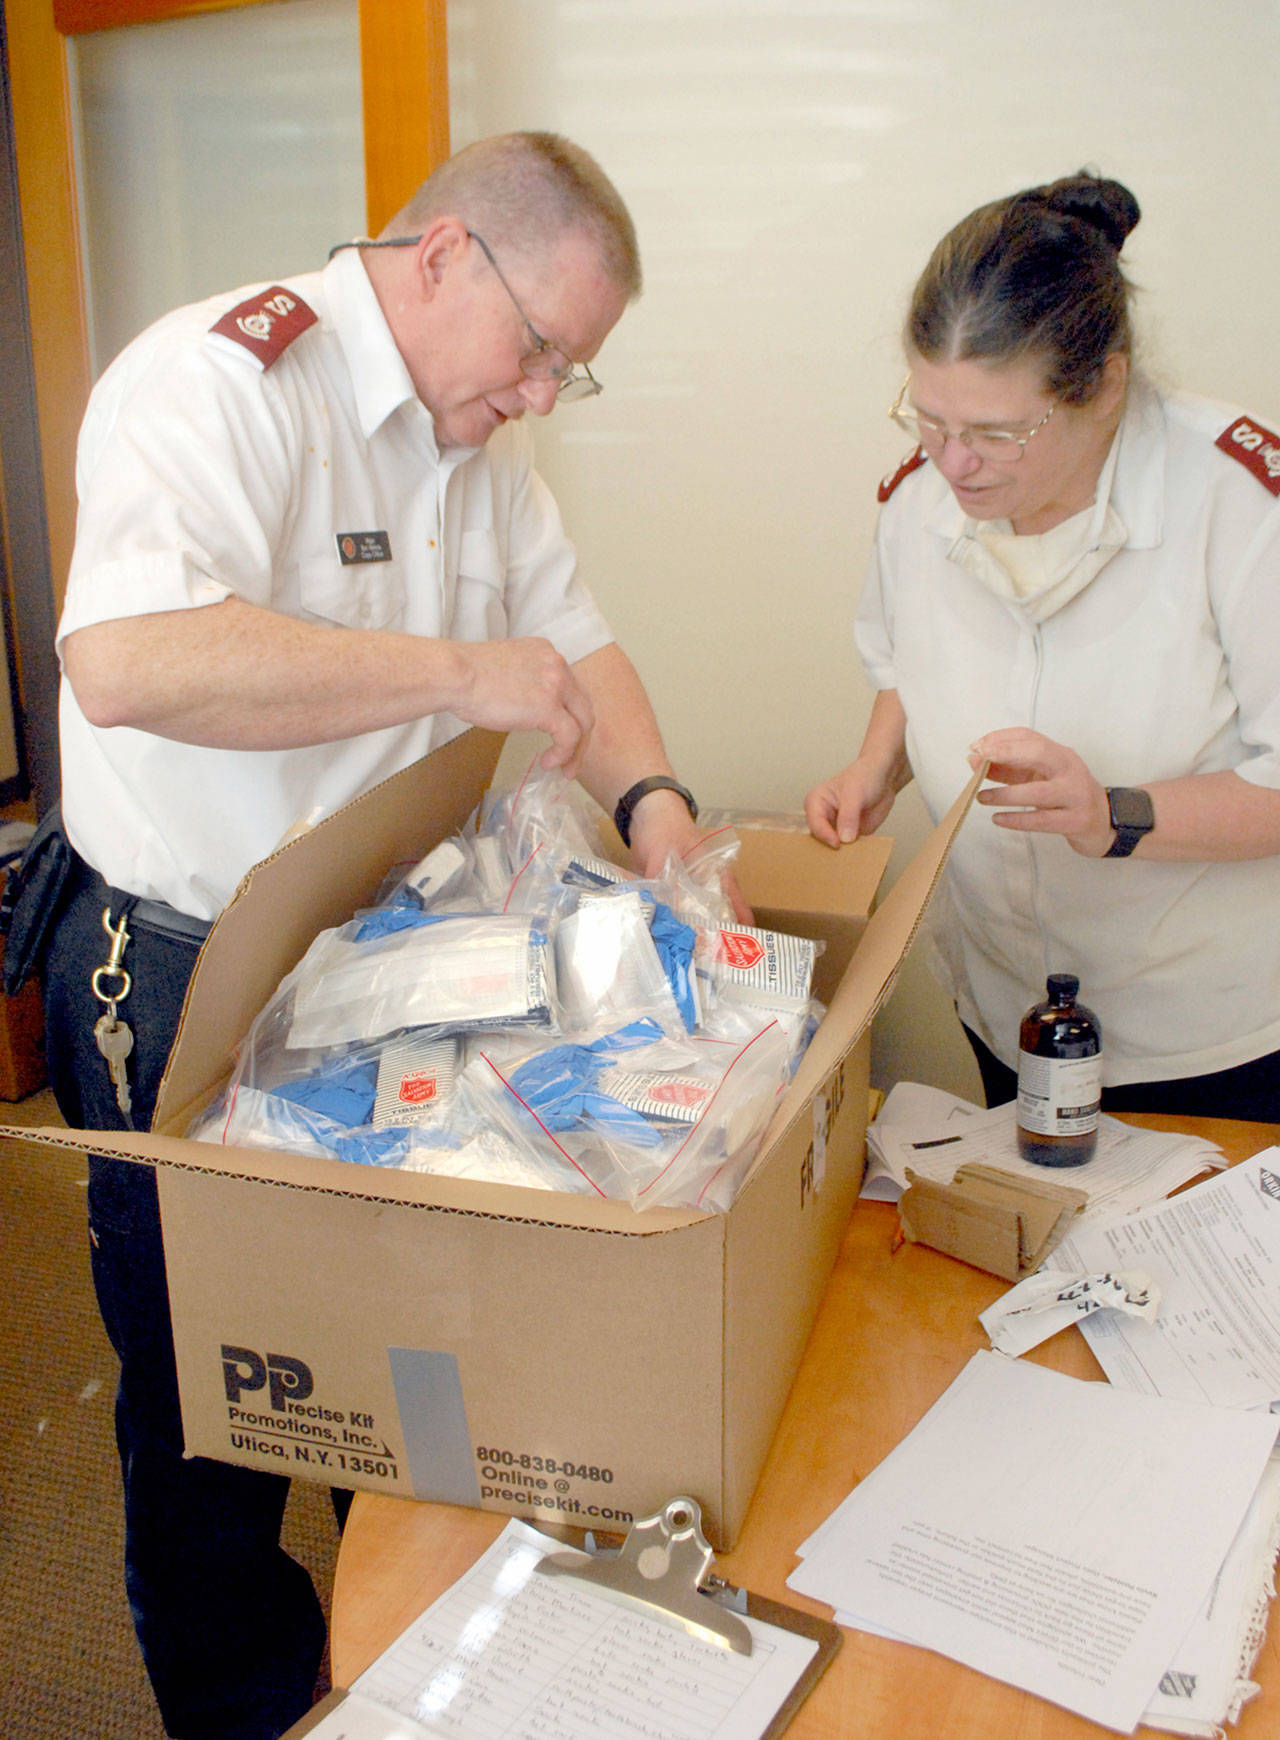 Port Angeles Salvation Army Majors Ron and Barbara Wehnau look over a box of self-protection packages that include soap, face masks and tissues packaged for distribution to the organization’s clients. (Keith Thorpe/Peninsula Daily News)